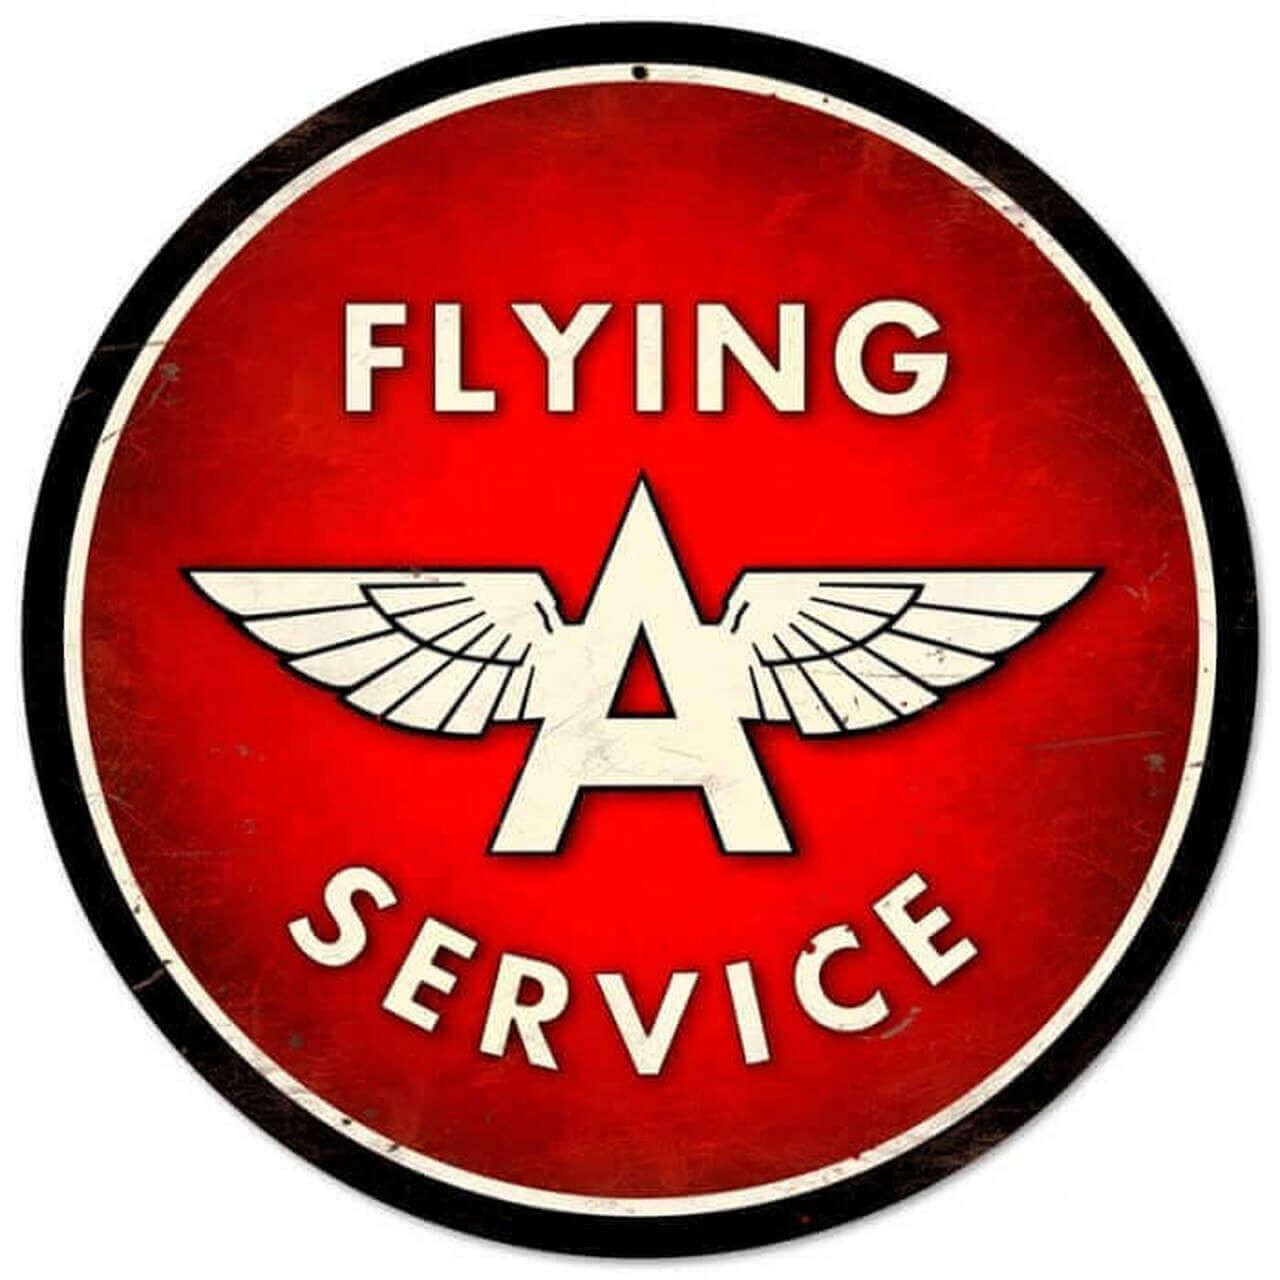 Retro Flying A Service Metal Sign 14 x 14 inches